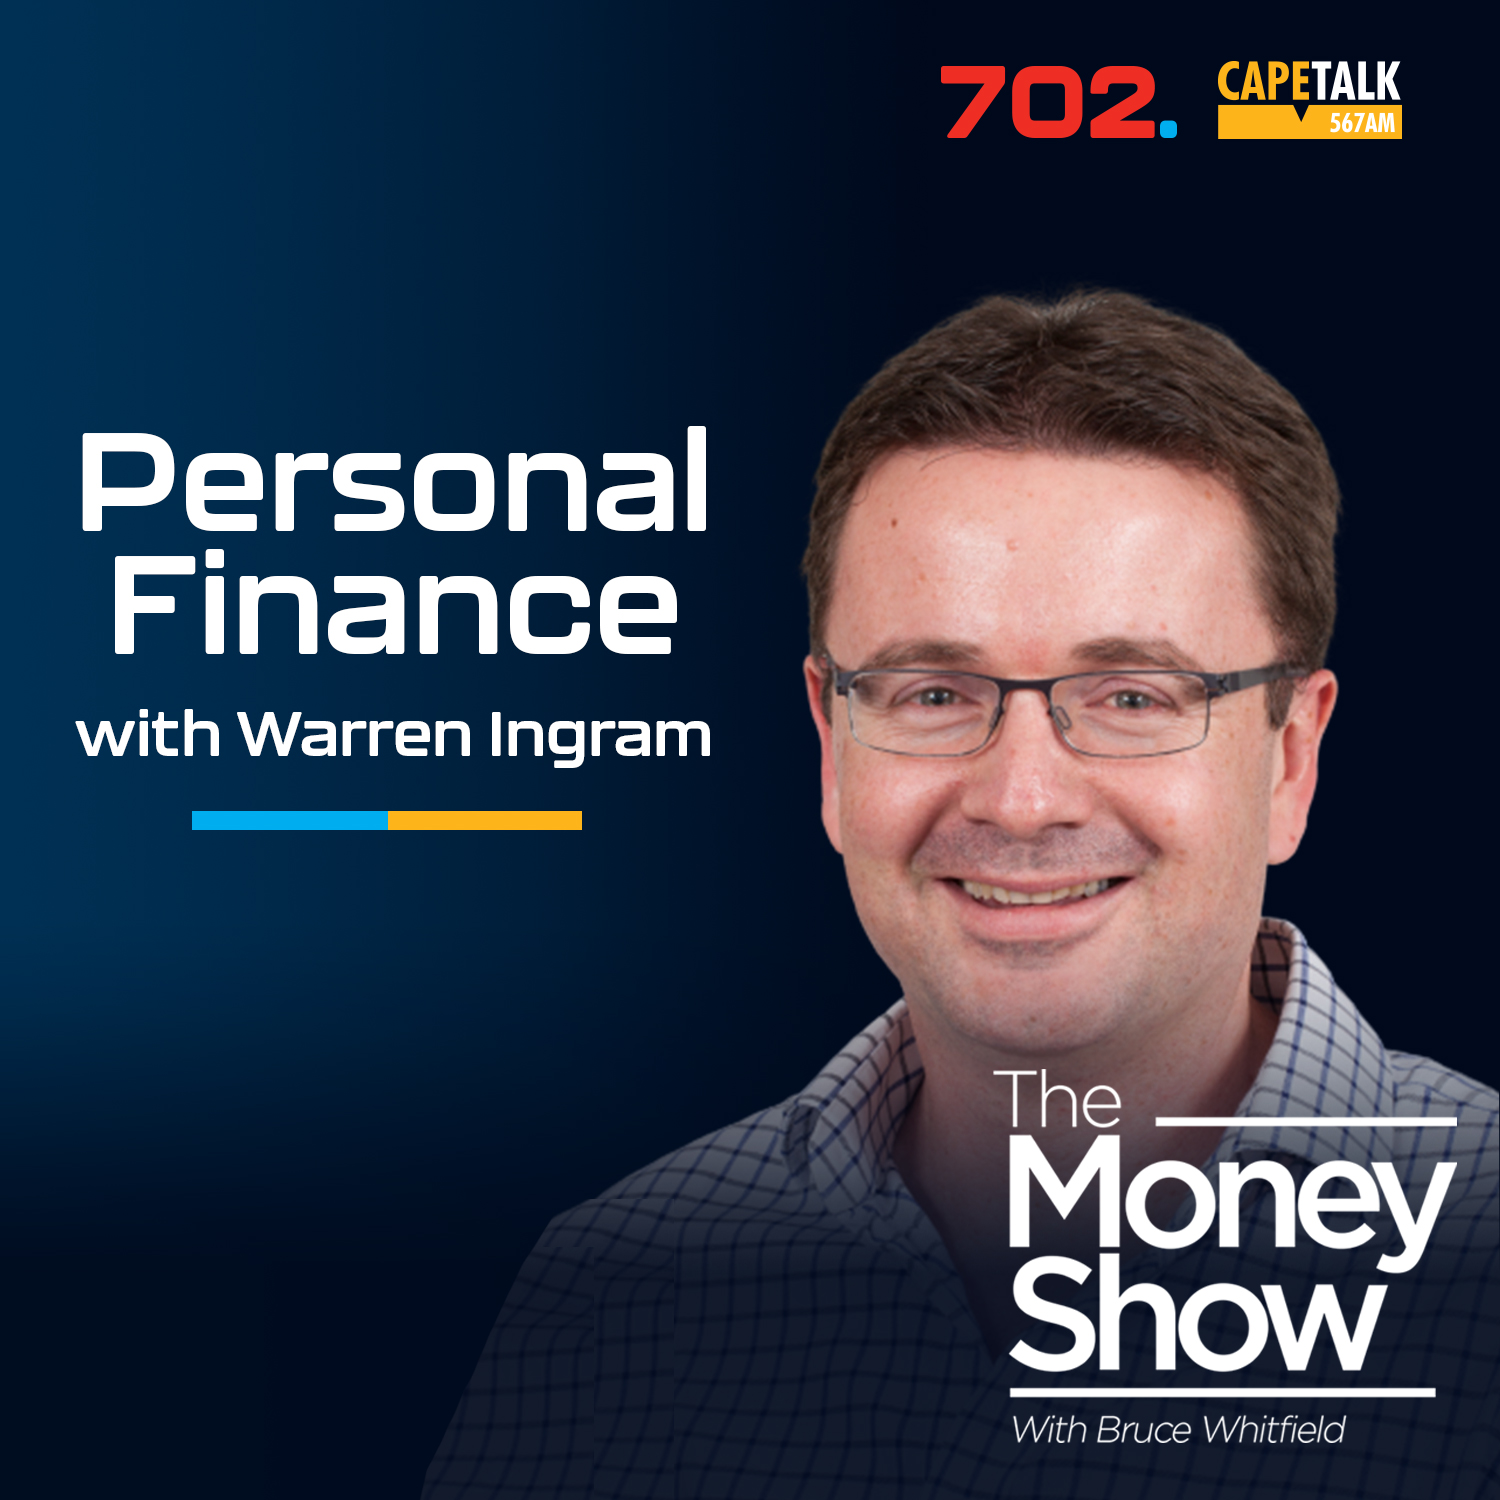 Personal Finance - Does it always make sense to phase in your money into the st